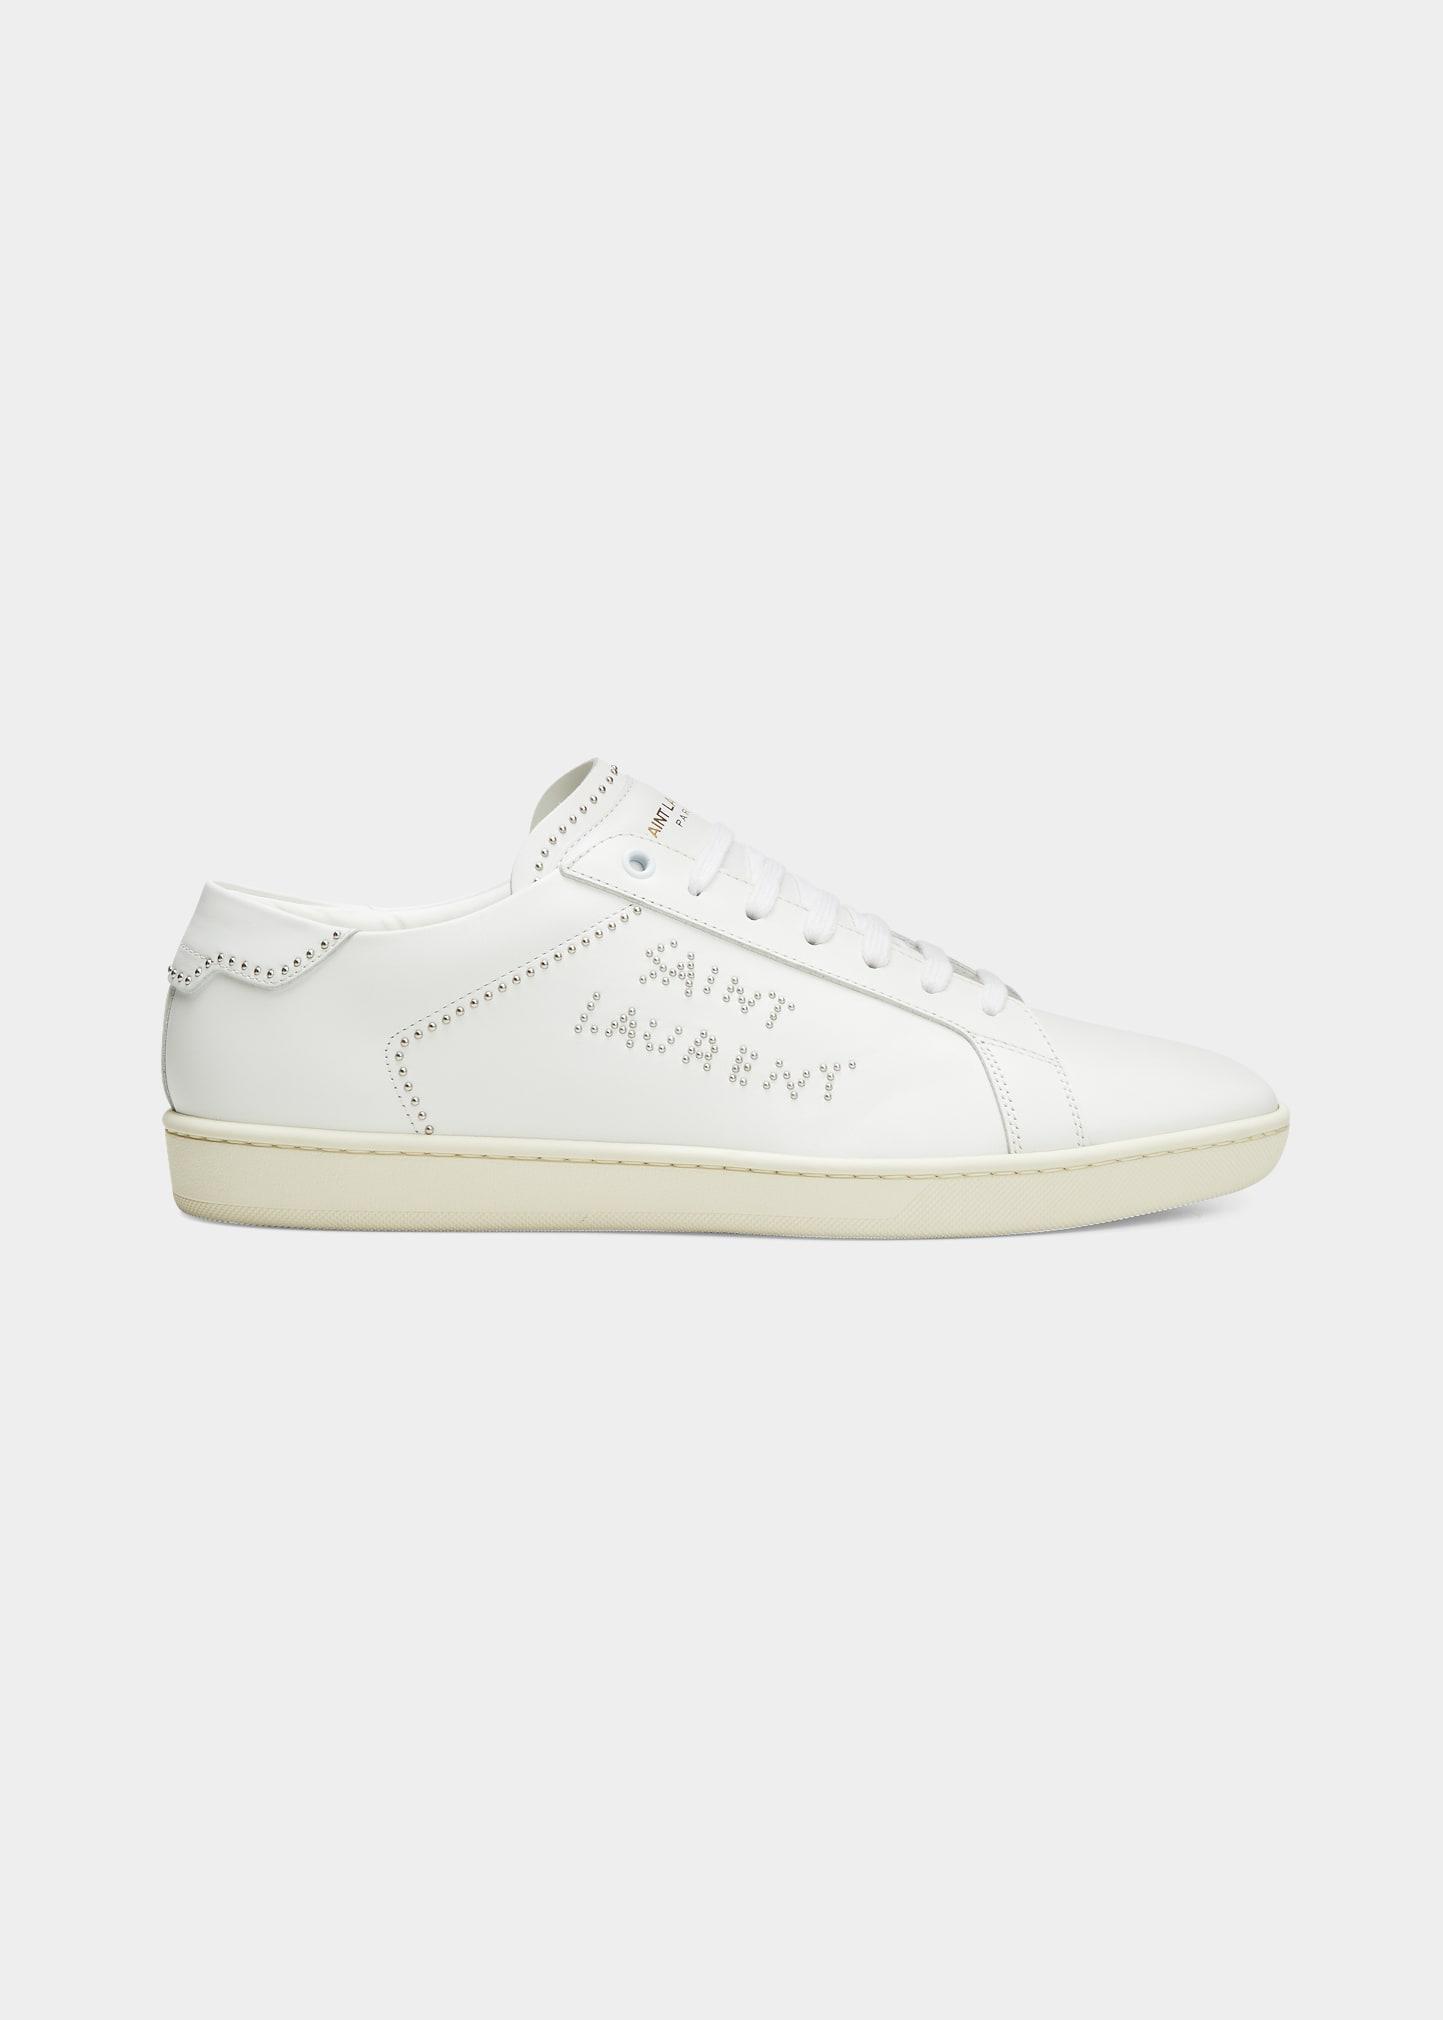 Saint Laurent Logo Stud Leather Low-top Sneakers in White for Men | Lyst